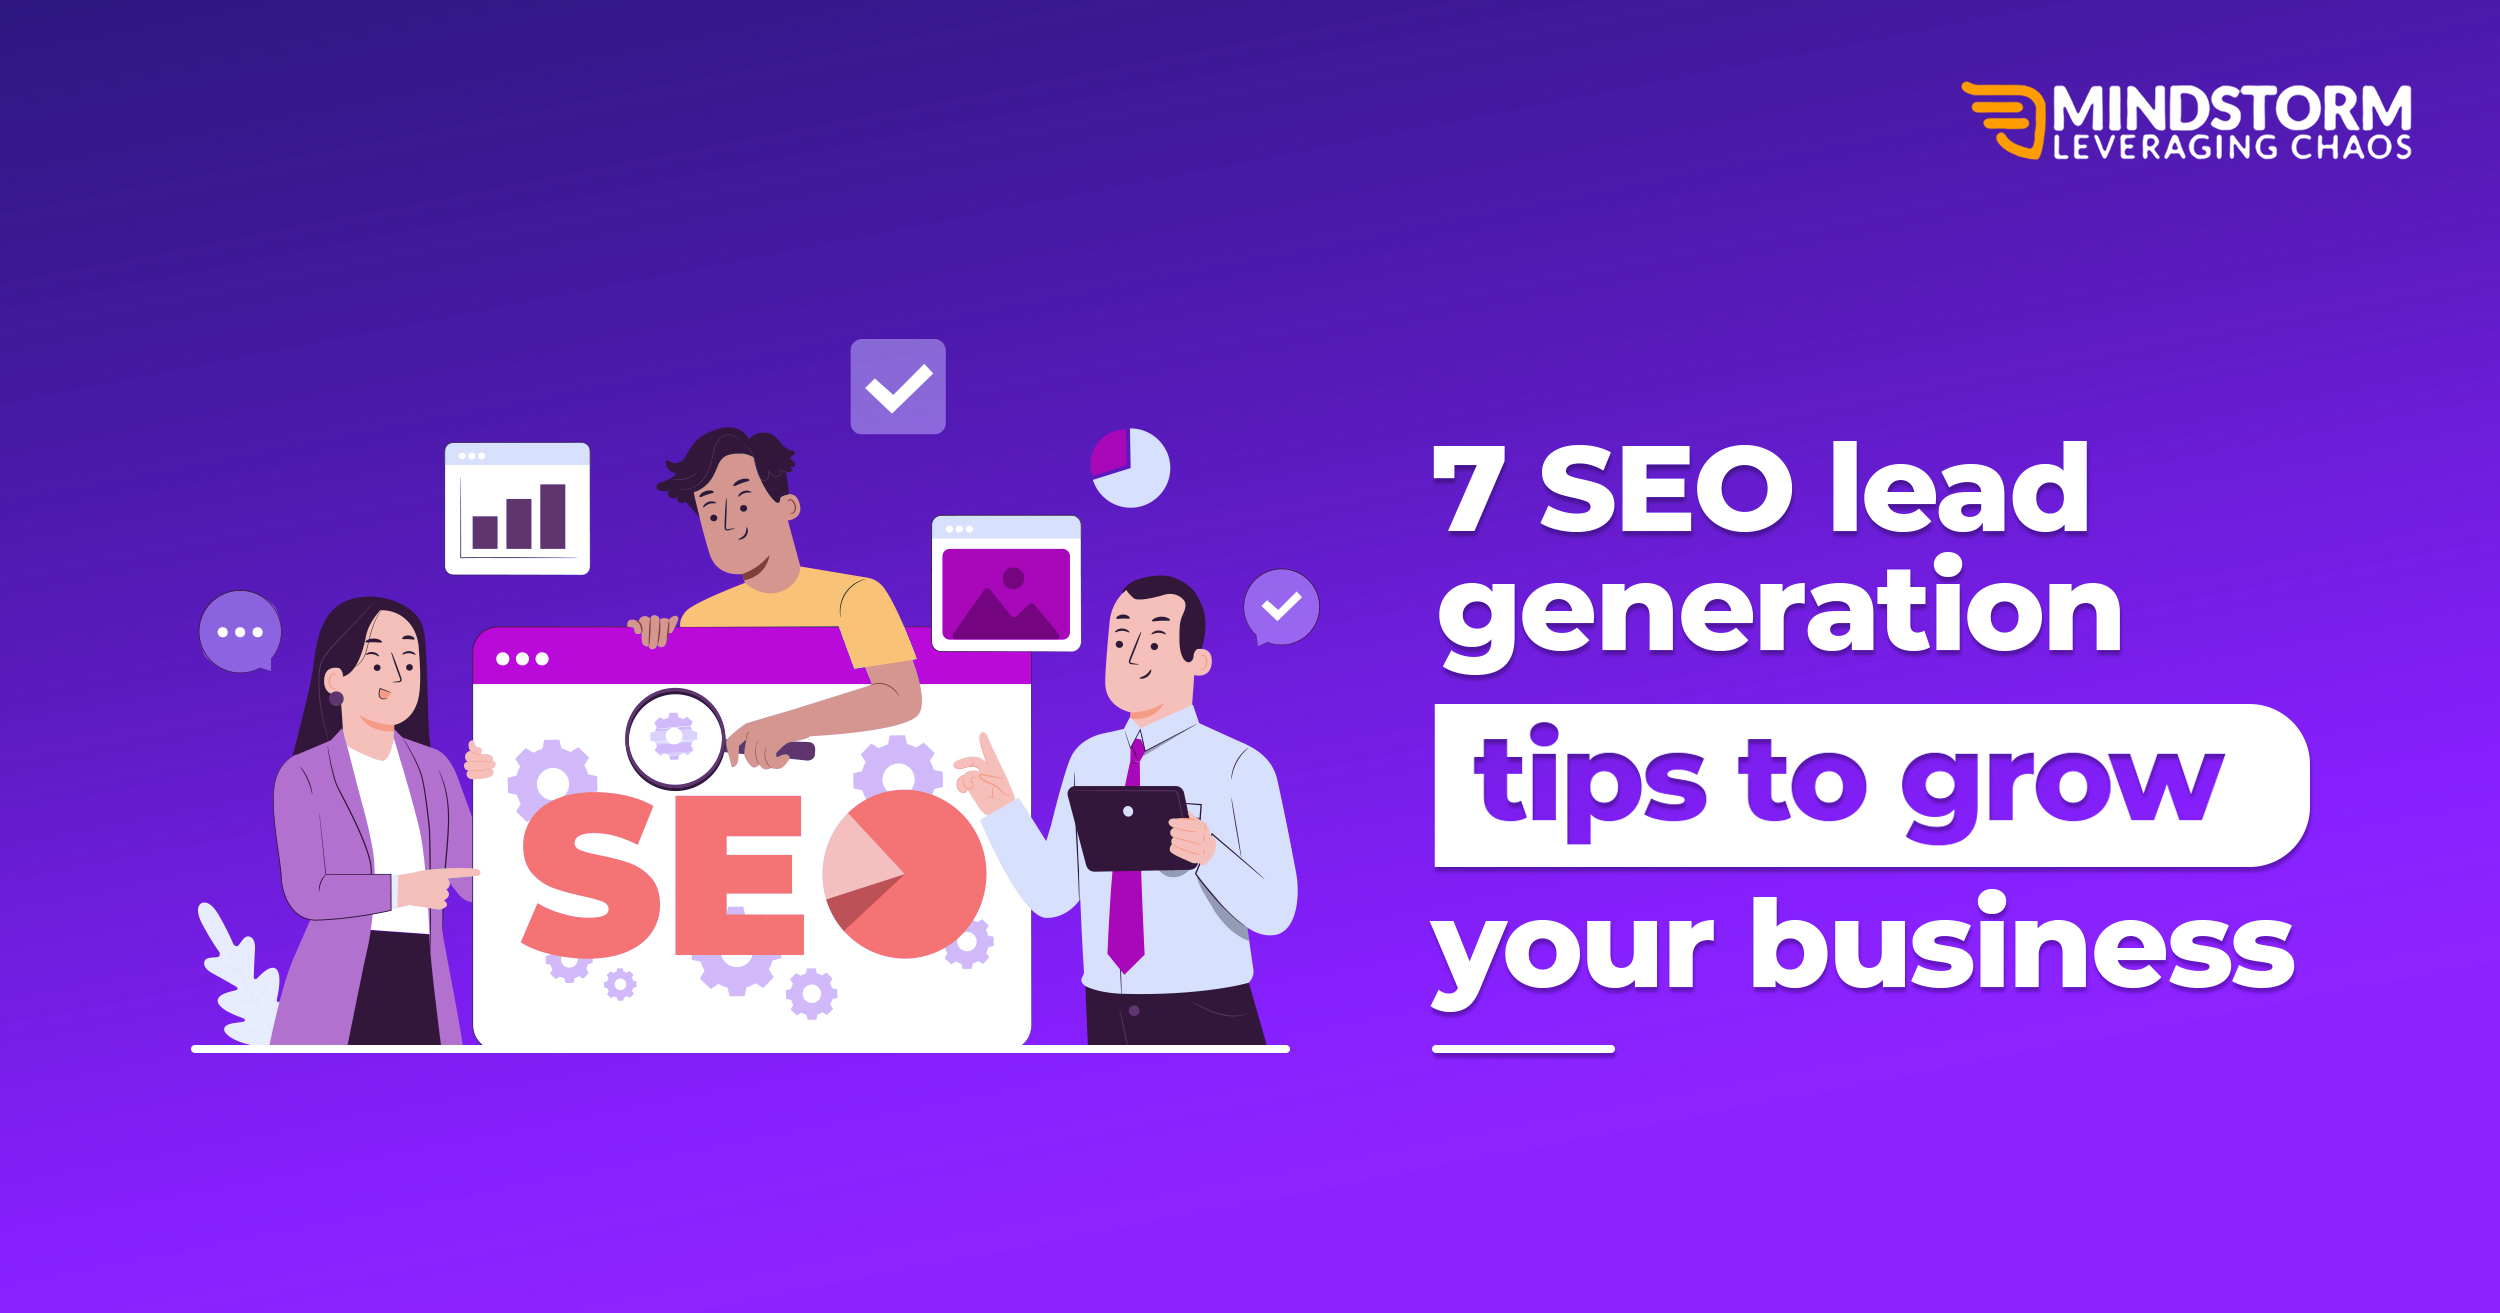 7 SEO lead generation tips to grow your business